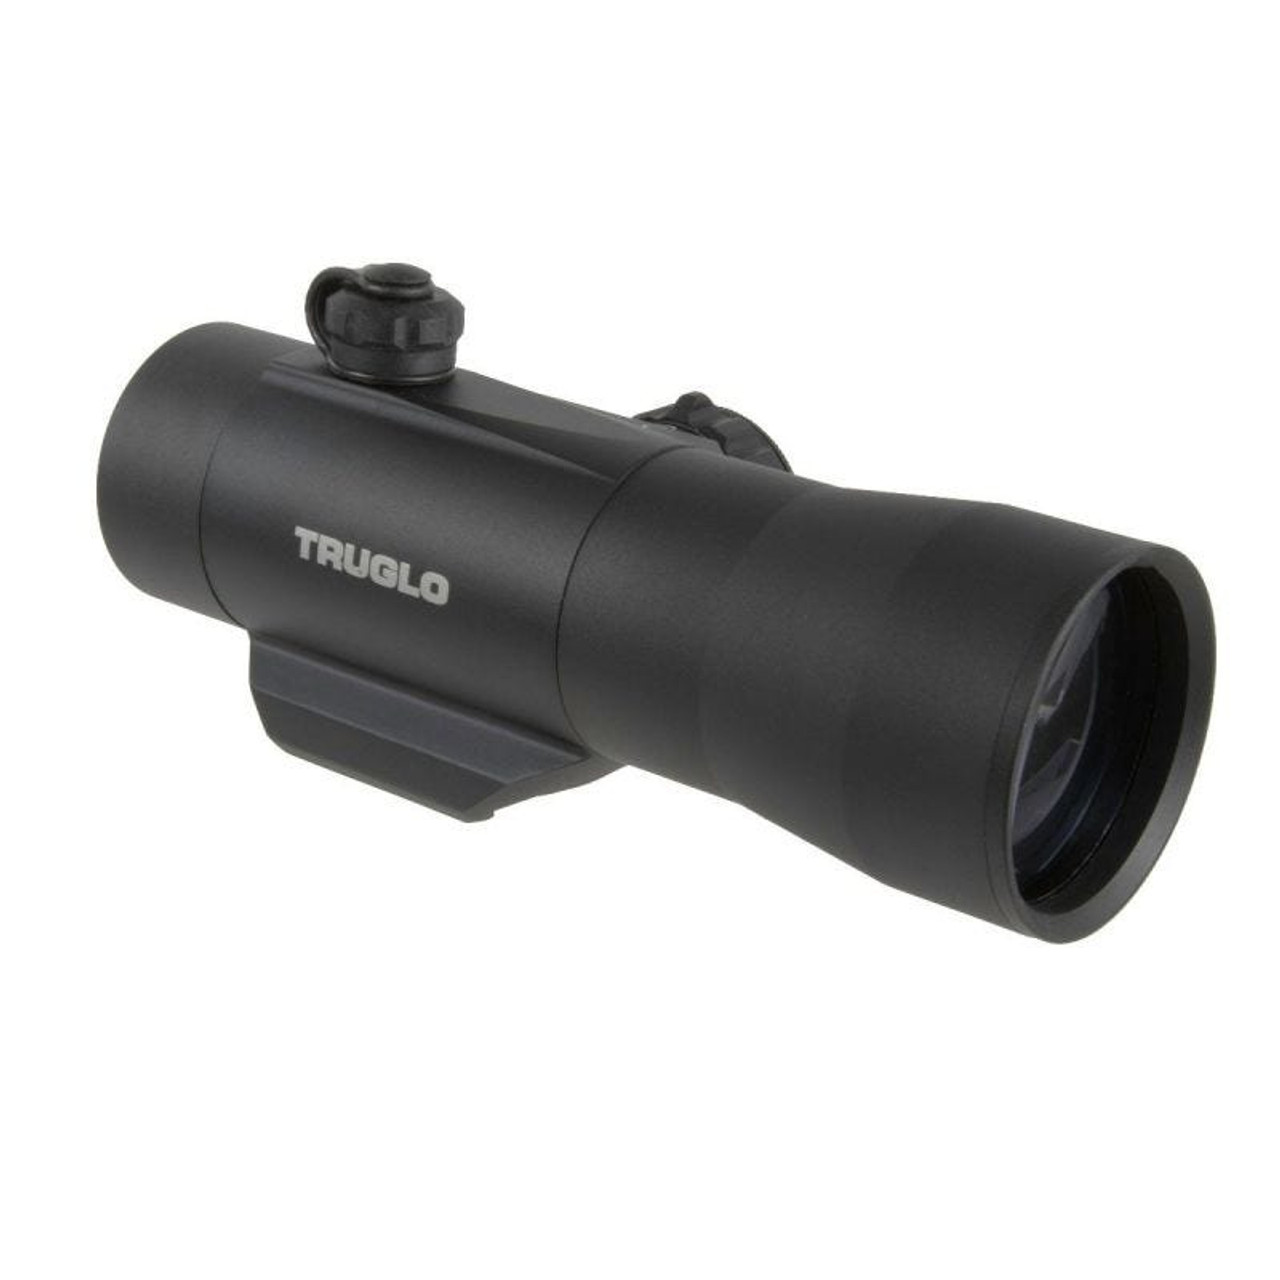 Truglo 42mm Red-Dot